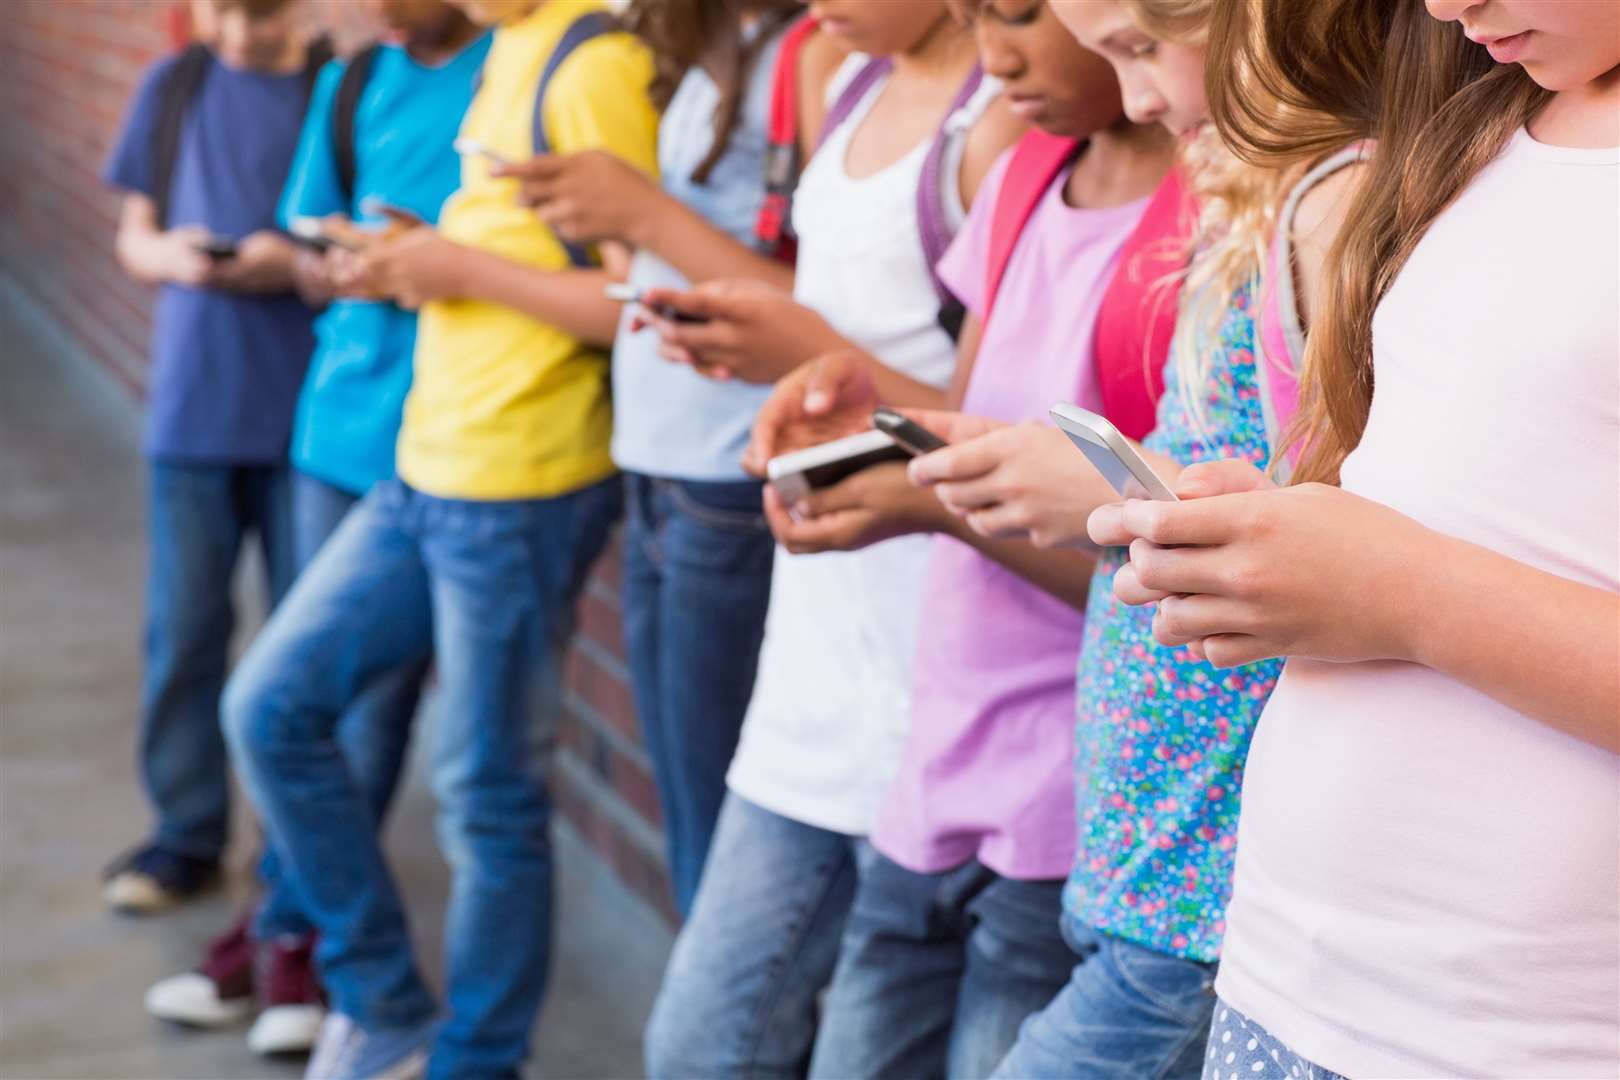 Many children get their first phone at 11, ahead of starting secondary school. Image: iStock.